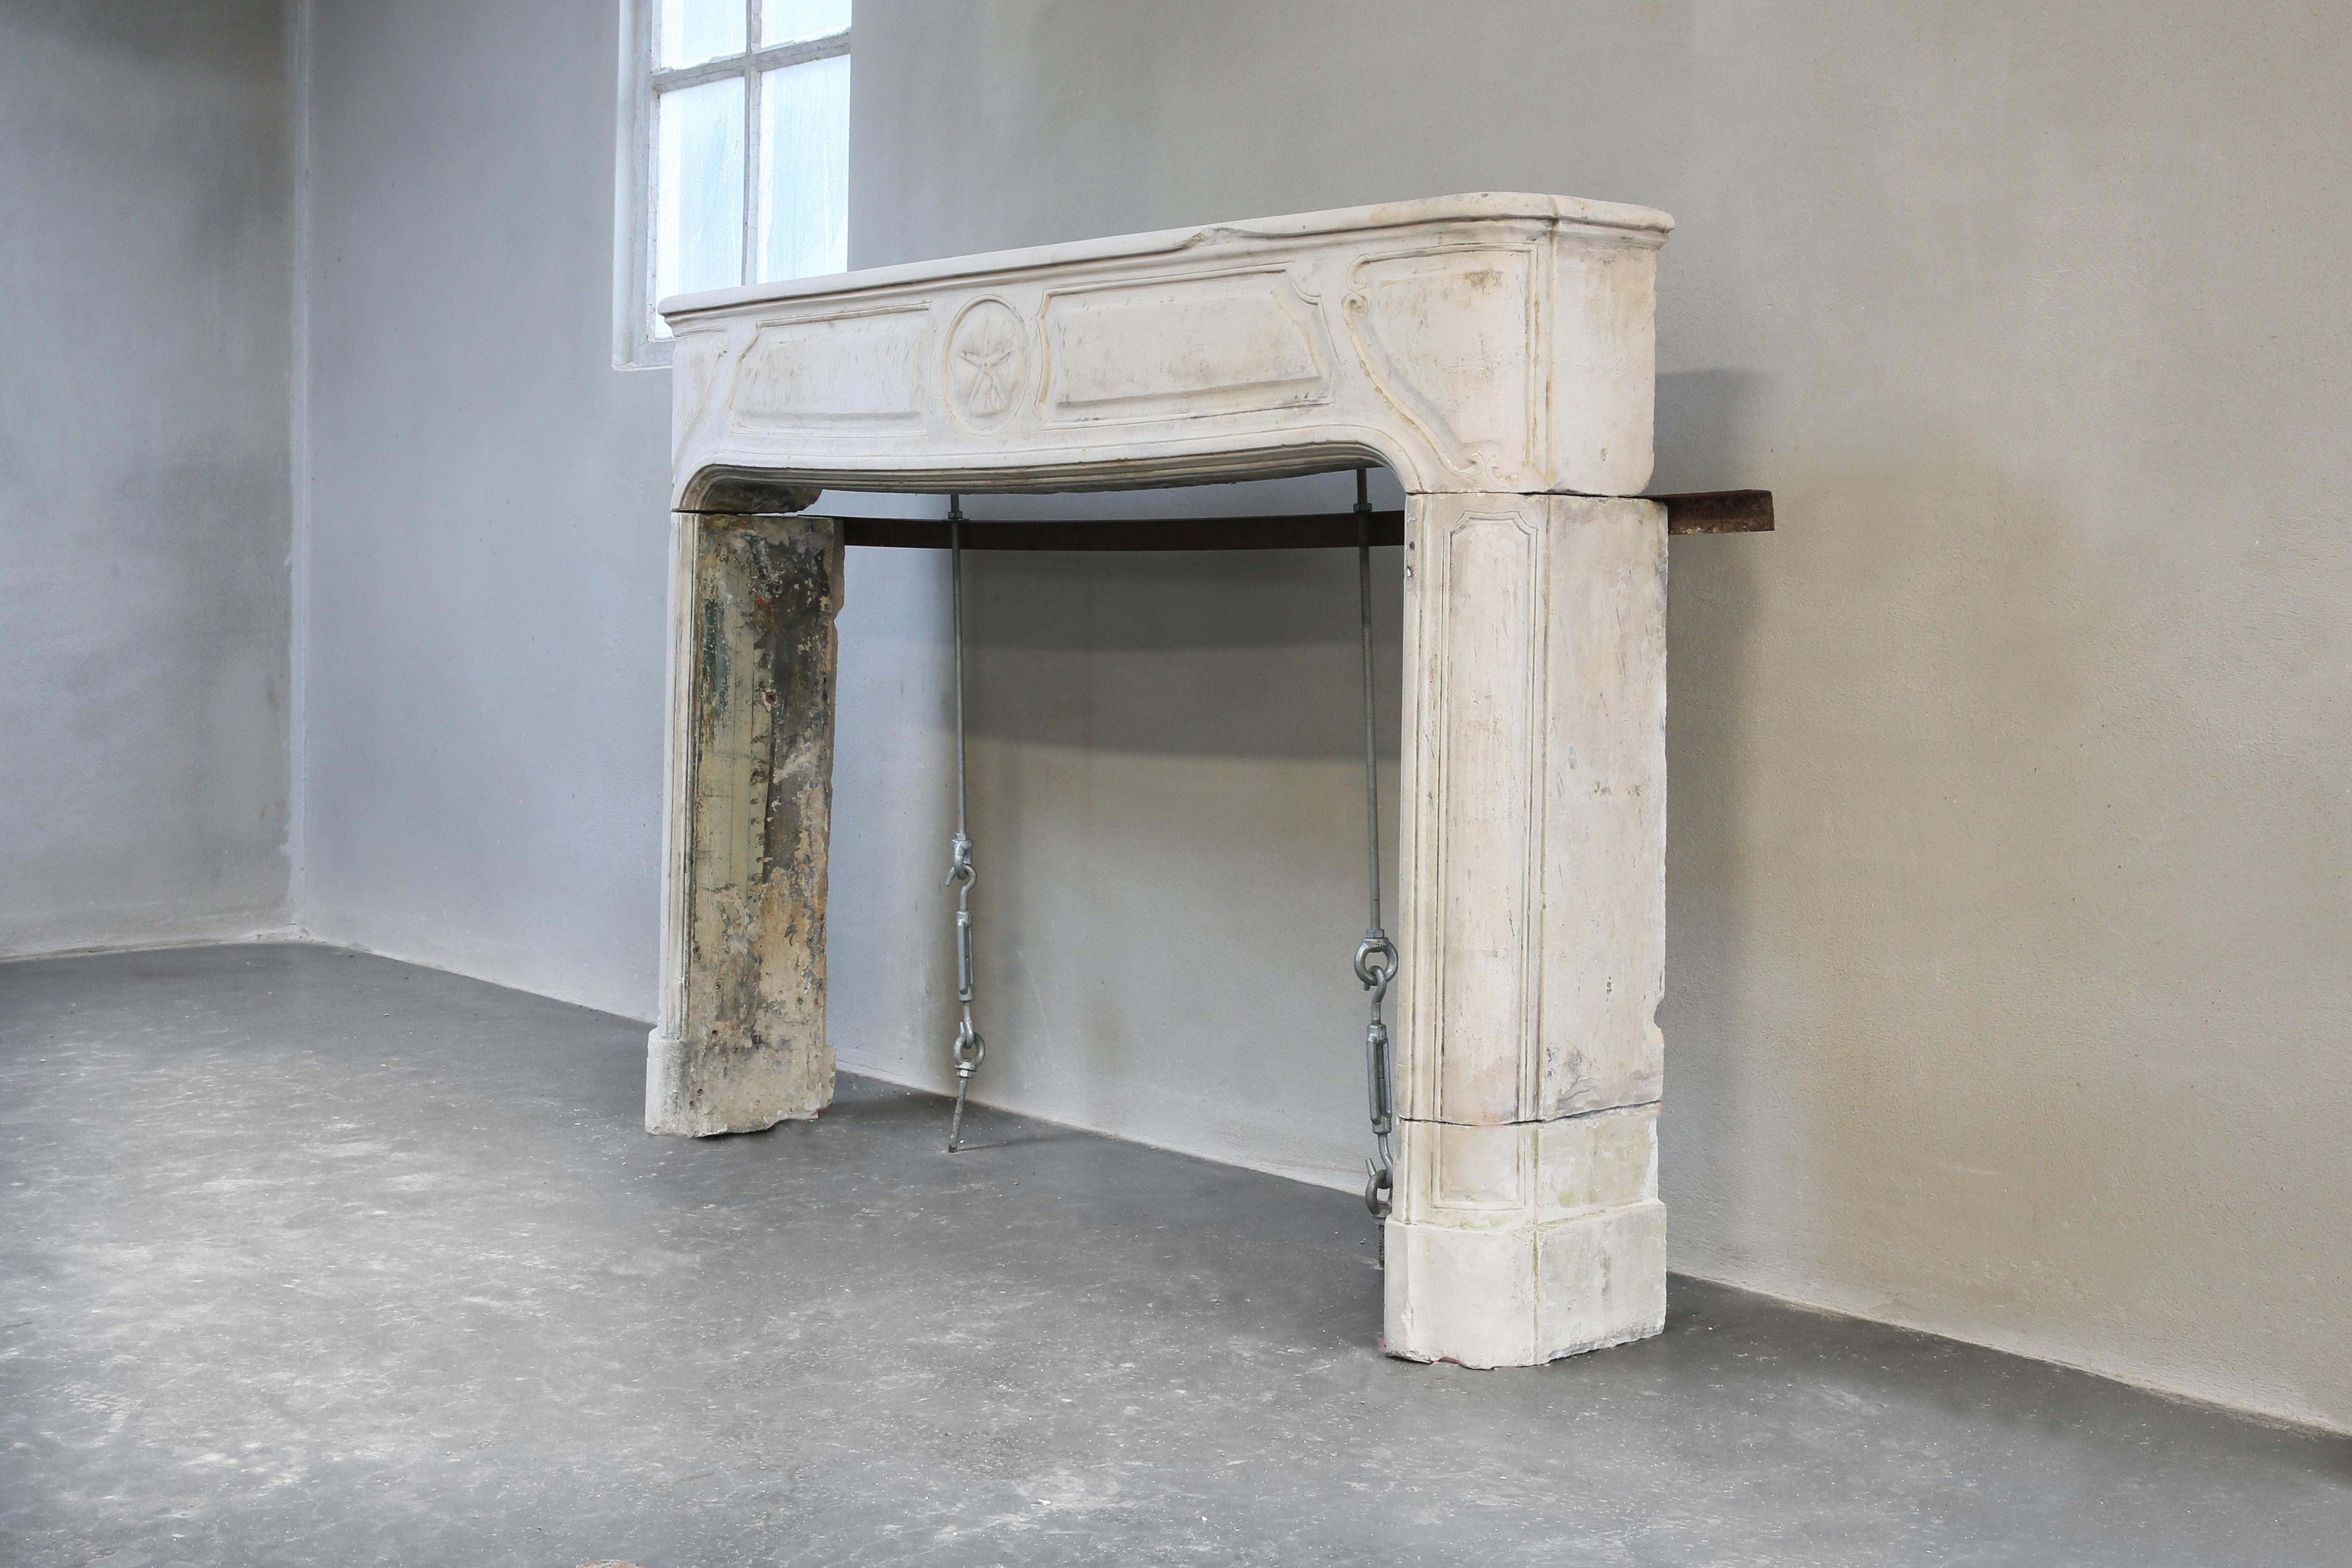 Beautiful antique fireplace from the 19th century in the style of Louis XIV. A fireplace with ornaments in the front part and beautiful lines on the legs! The dimensions are also applicable for many interiors. The light color of the mantle provides